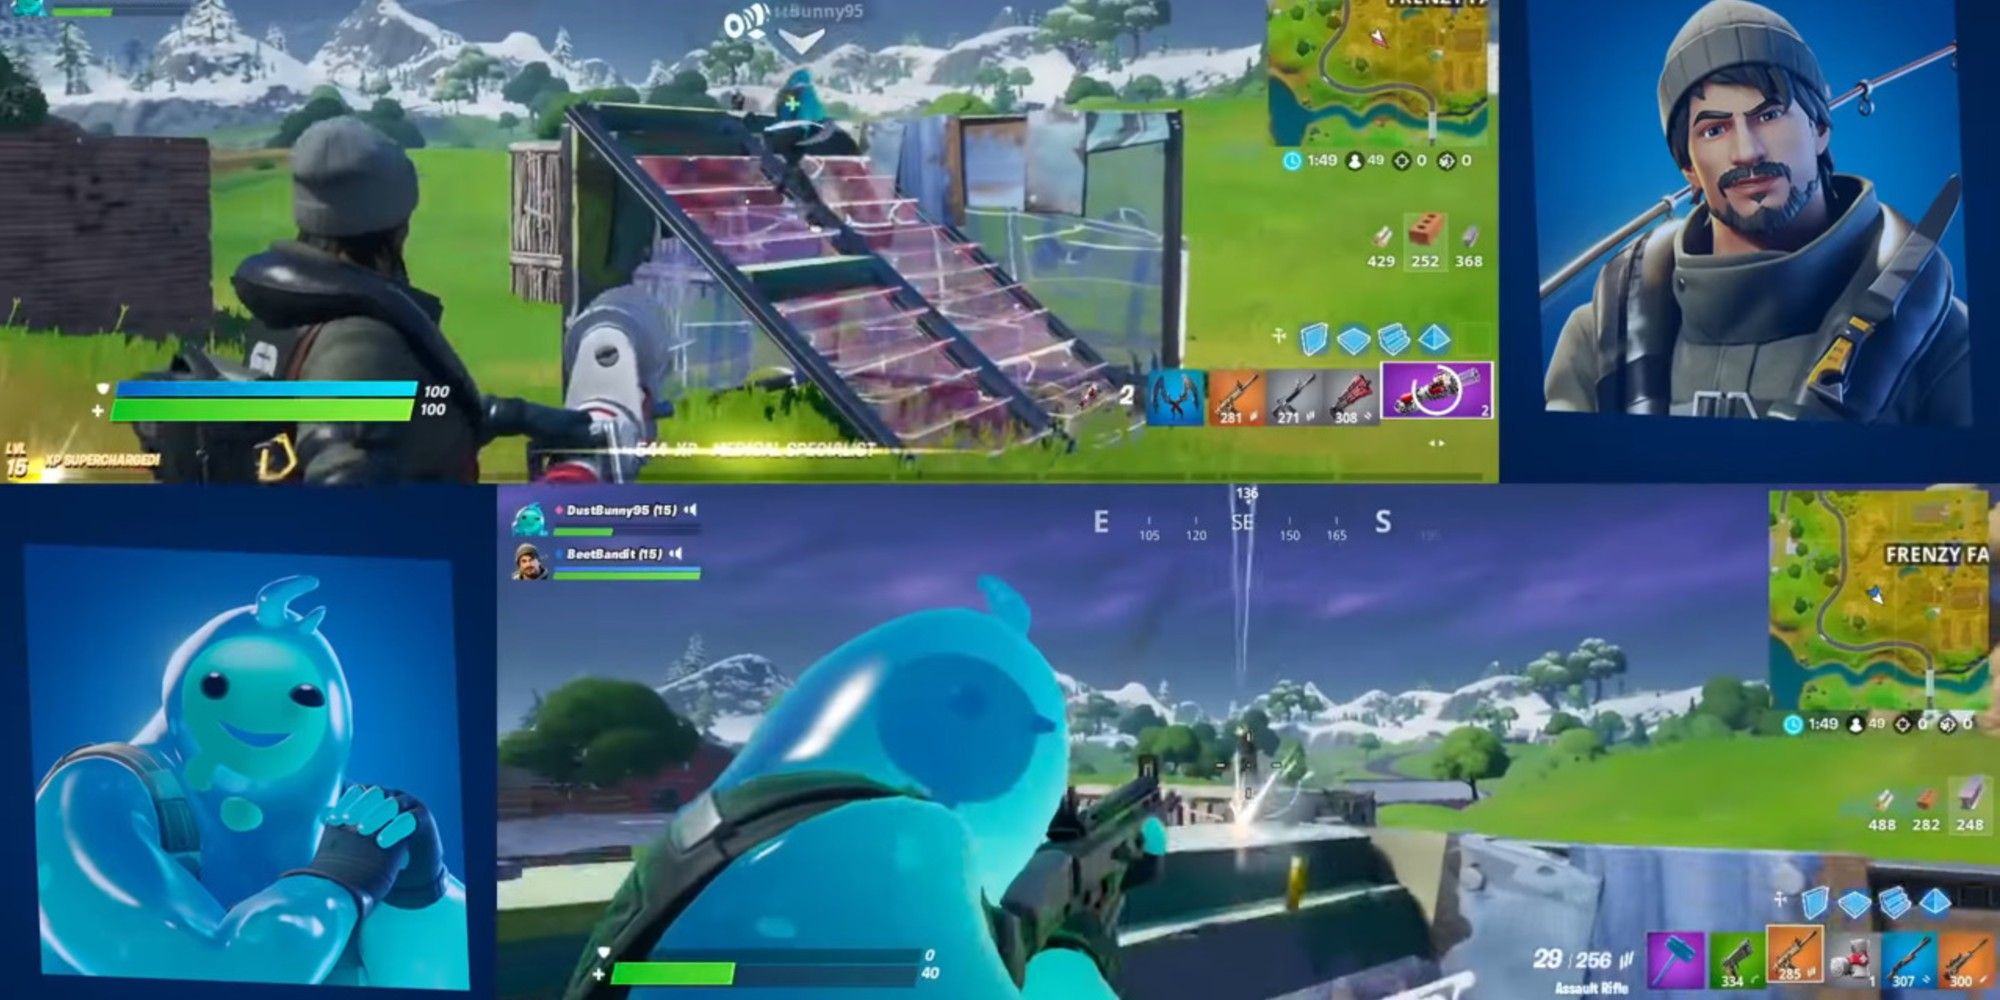 Can You Play Split Screen On Fortnite Switch Fortnite How To Set Up Split Screen Play Screen Rant